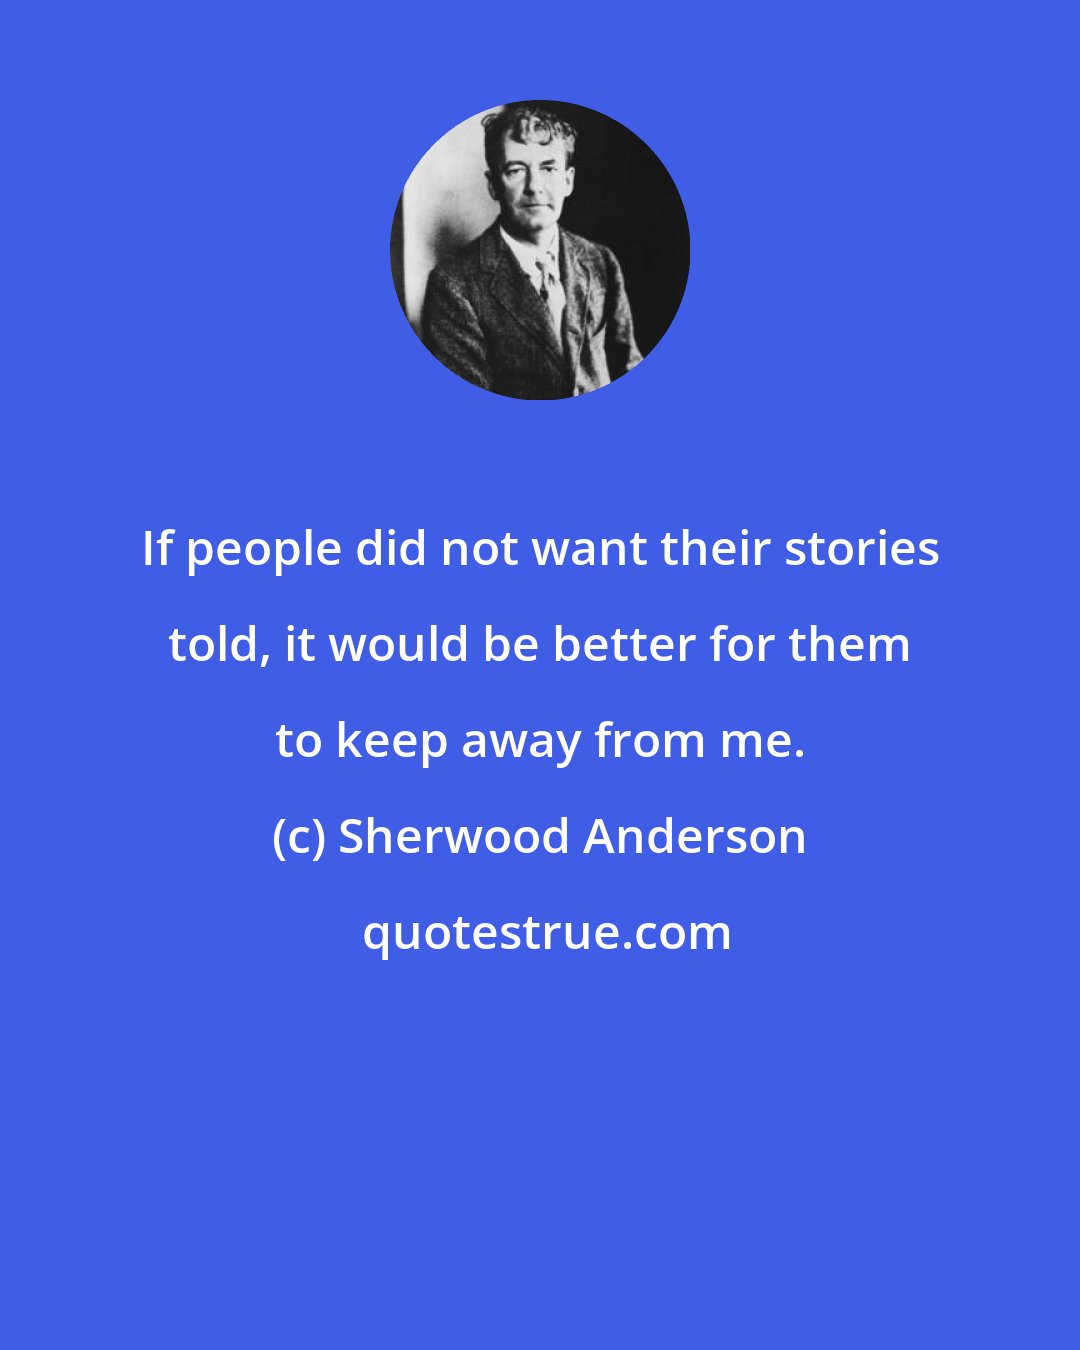 Sherwood Anderson: If people did not want their stories told, it would be better for them to keep away from me.